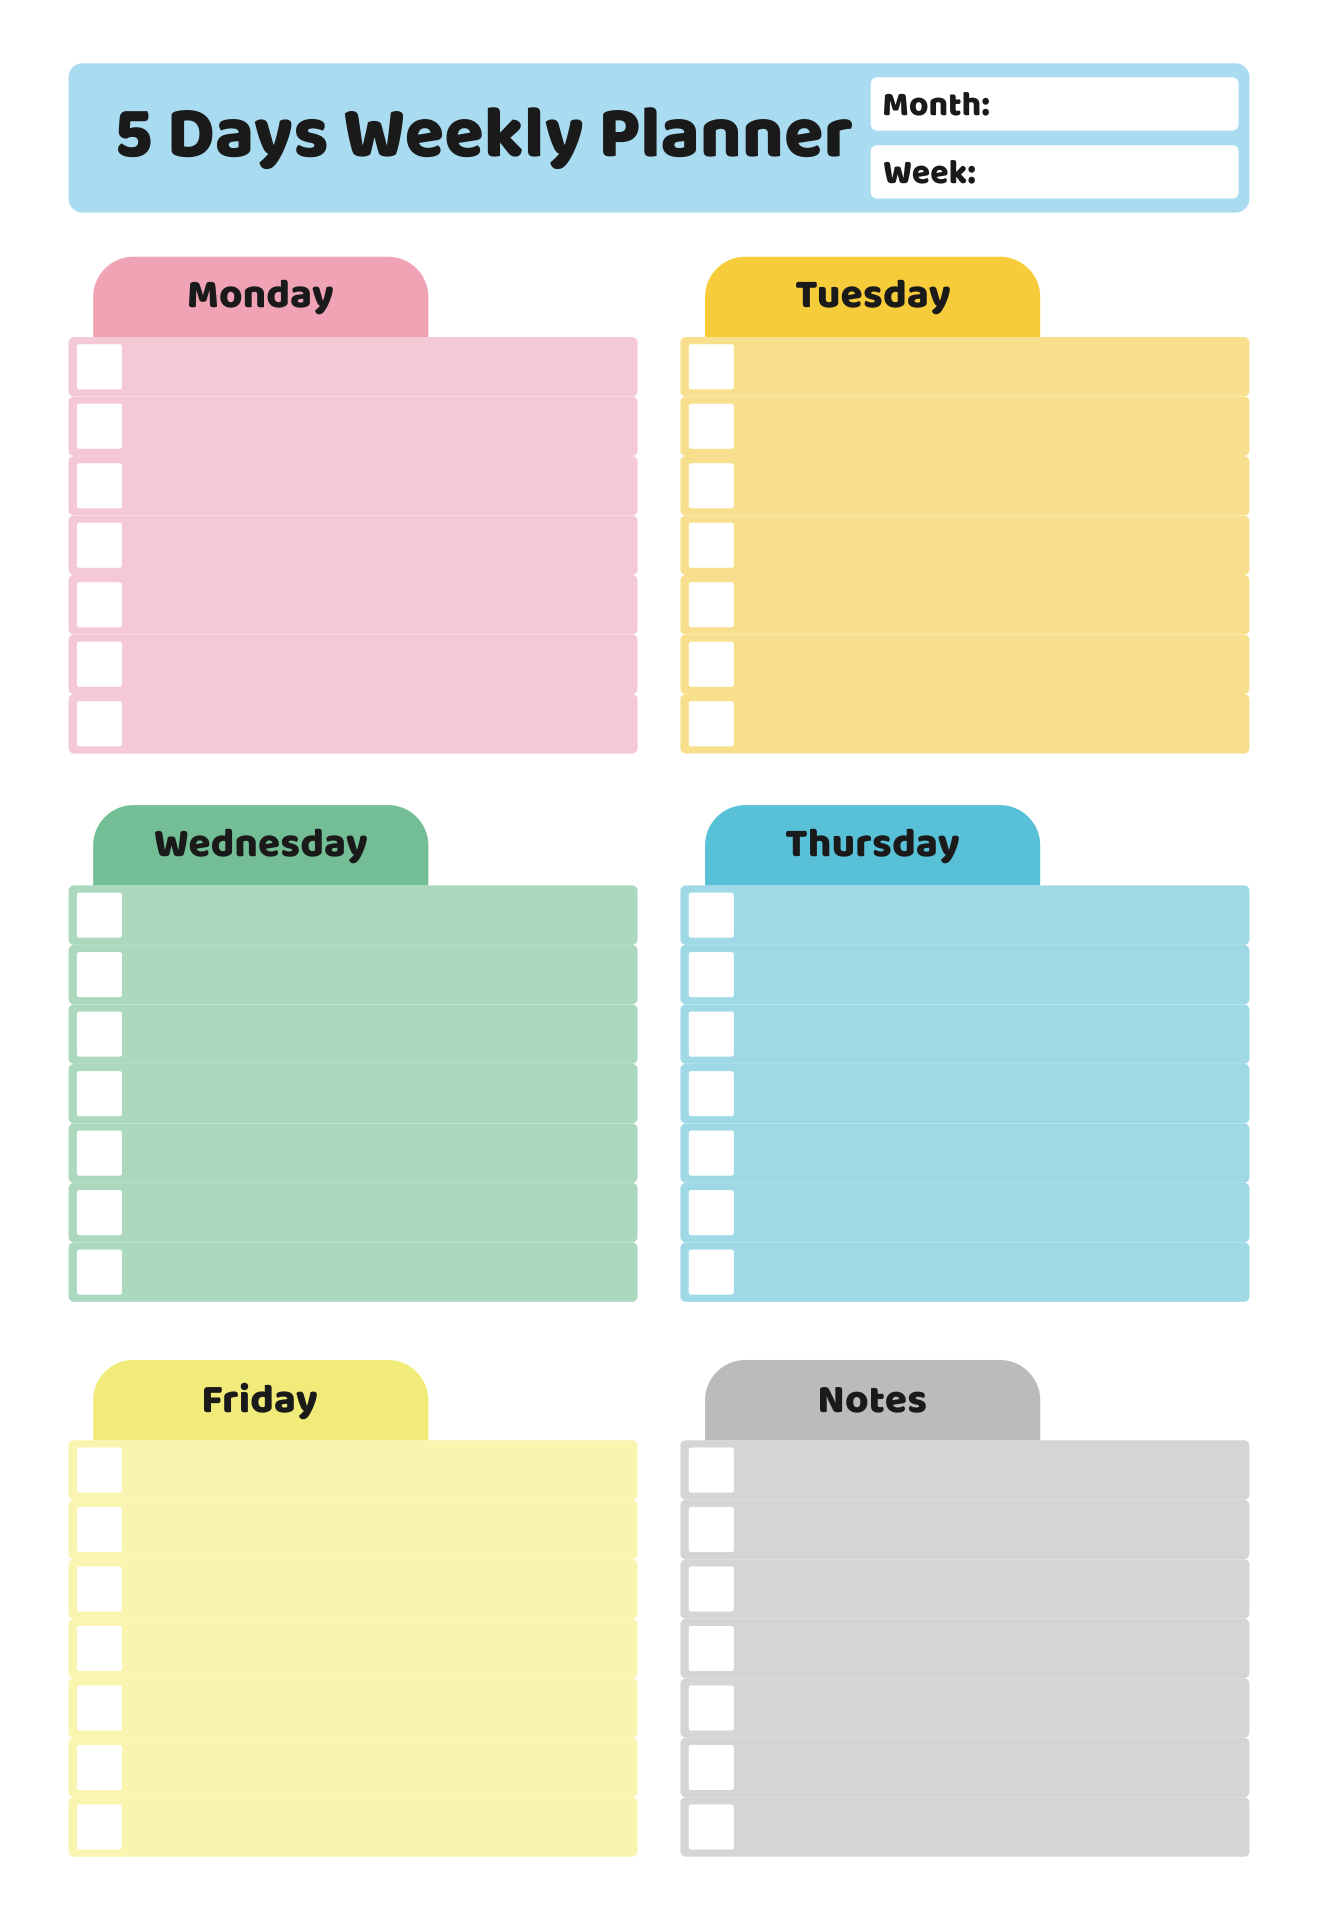 5-day-work-week-schedule-template-get-what-you-need-for-free